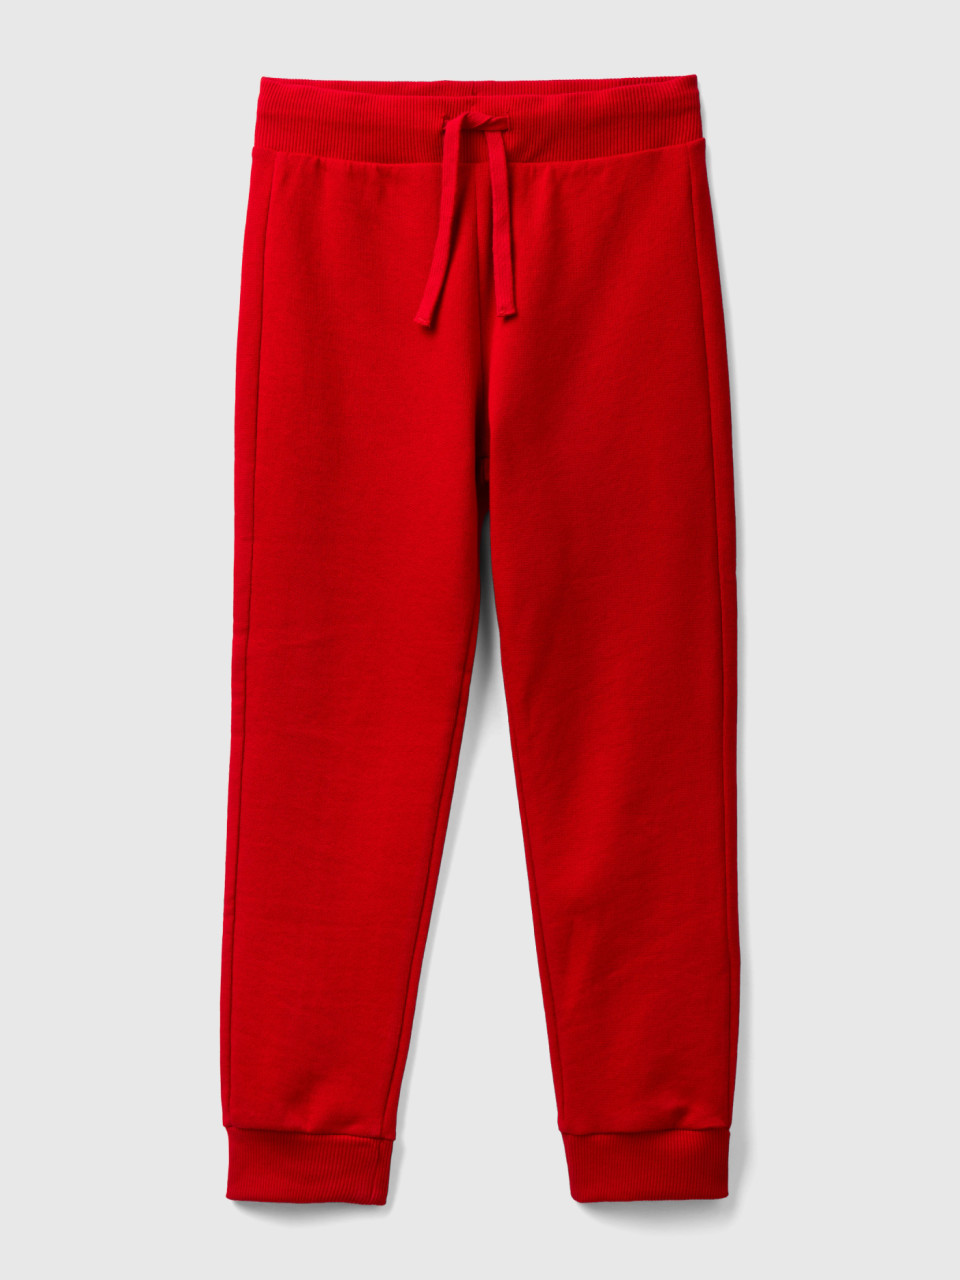 Benetton, Sporty Trousers With Drawstring, Red, Kids